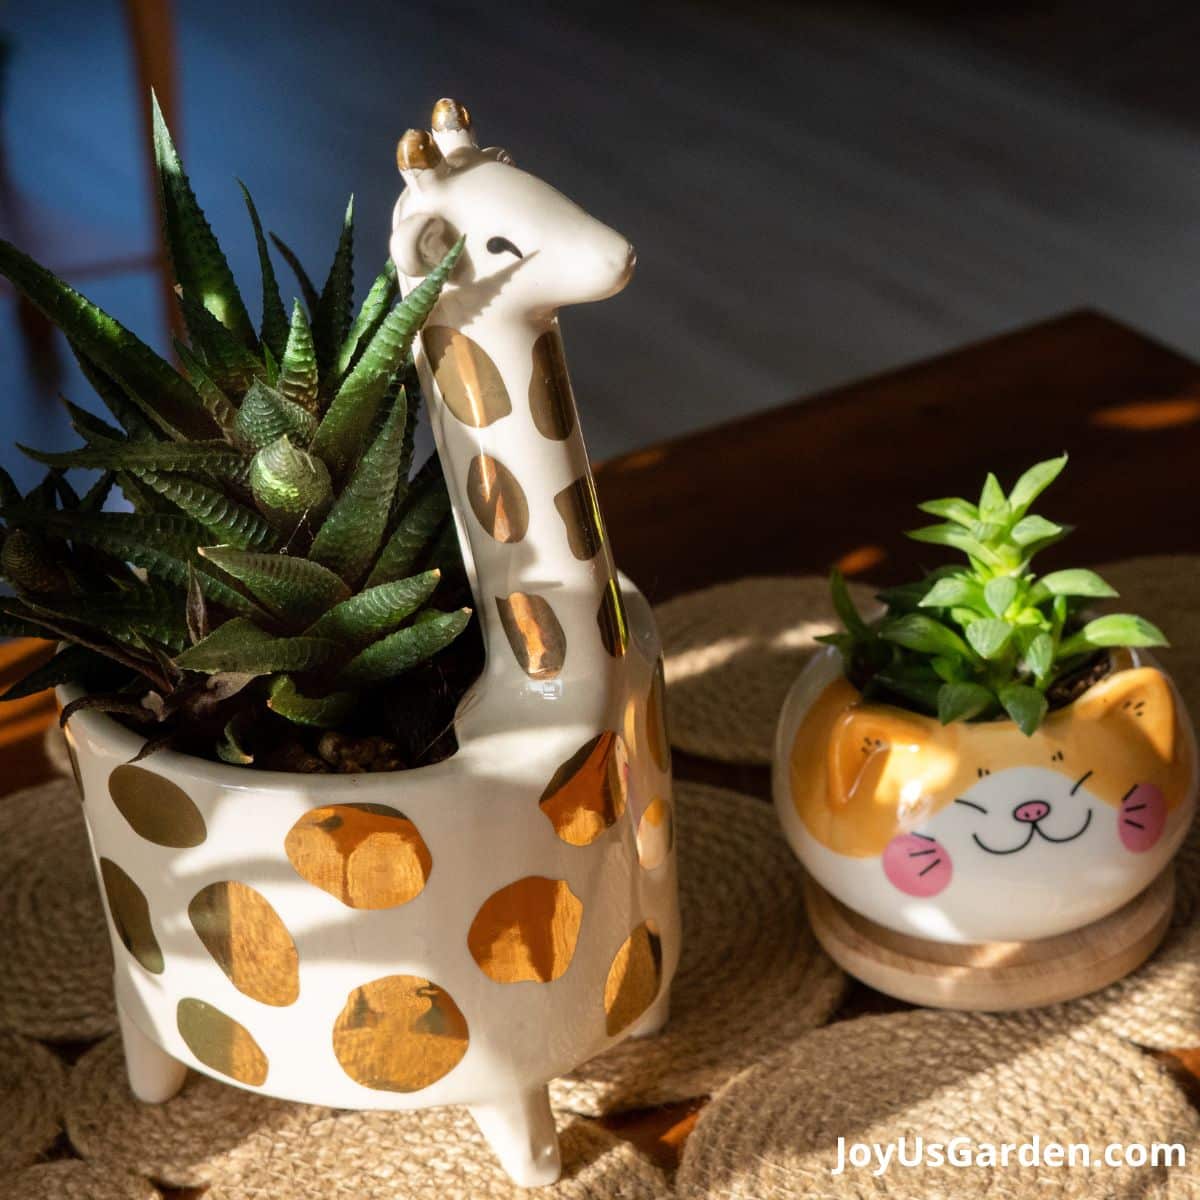 2 animal plant pots, giraffe pot and cat pot, with succulents planted inside